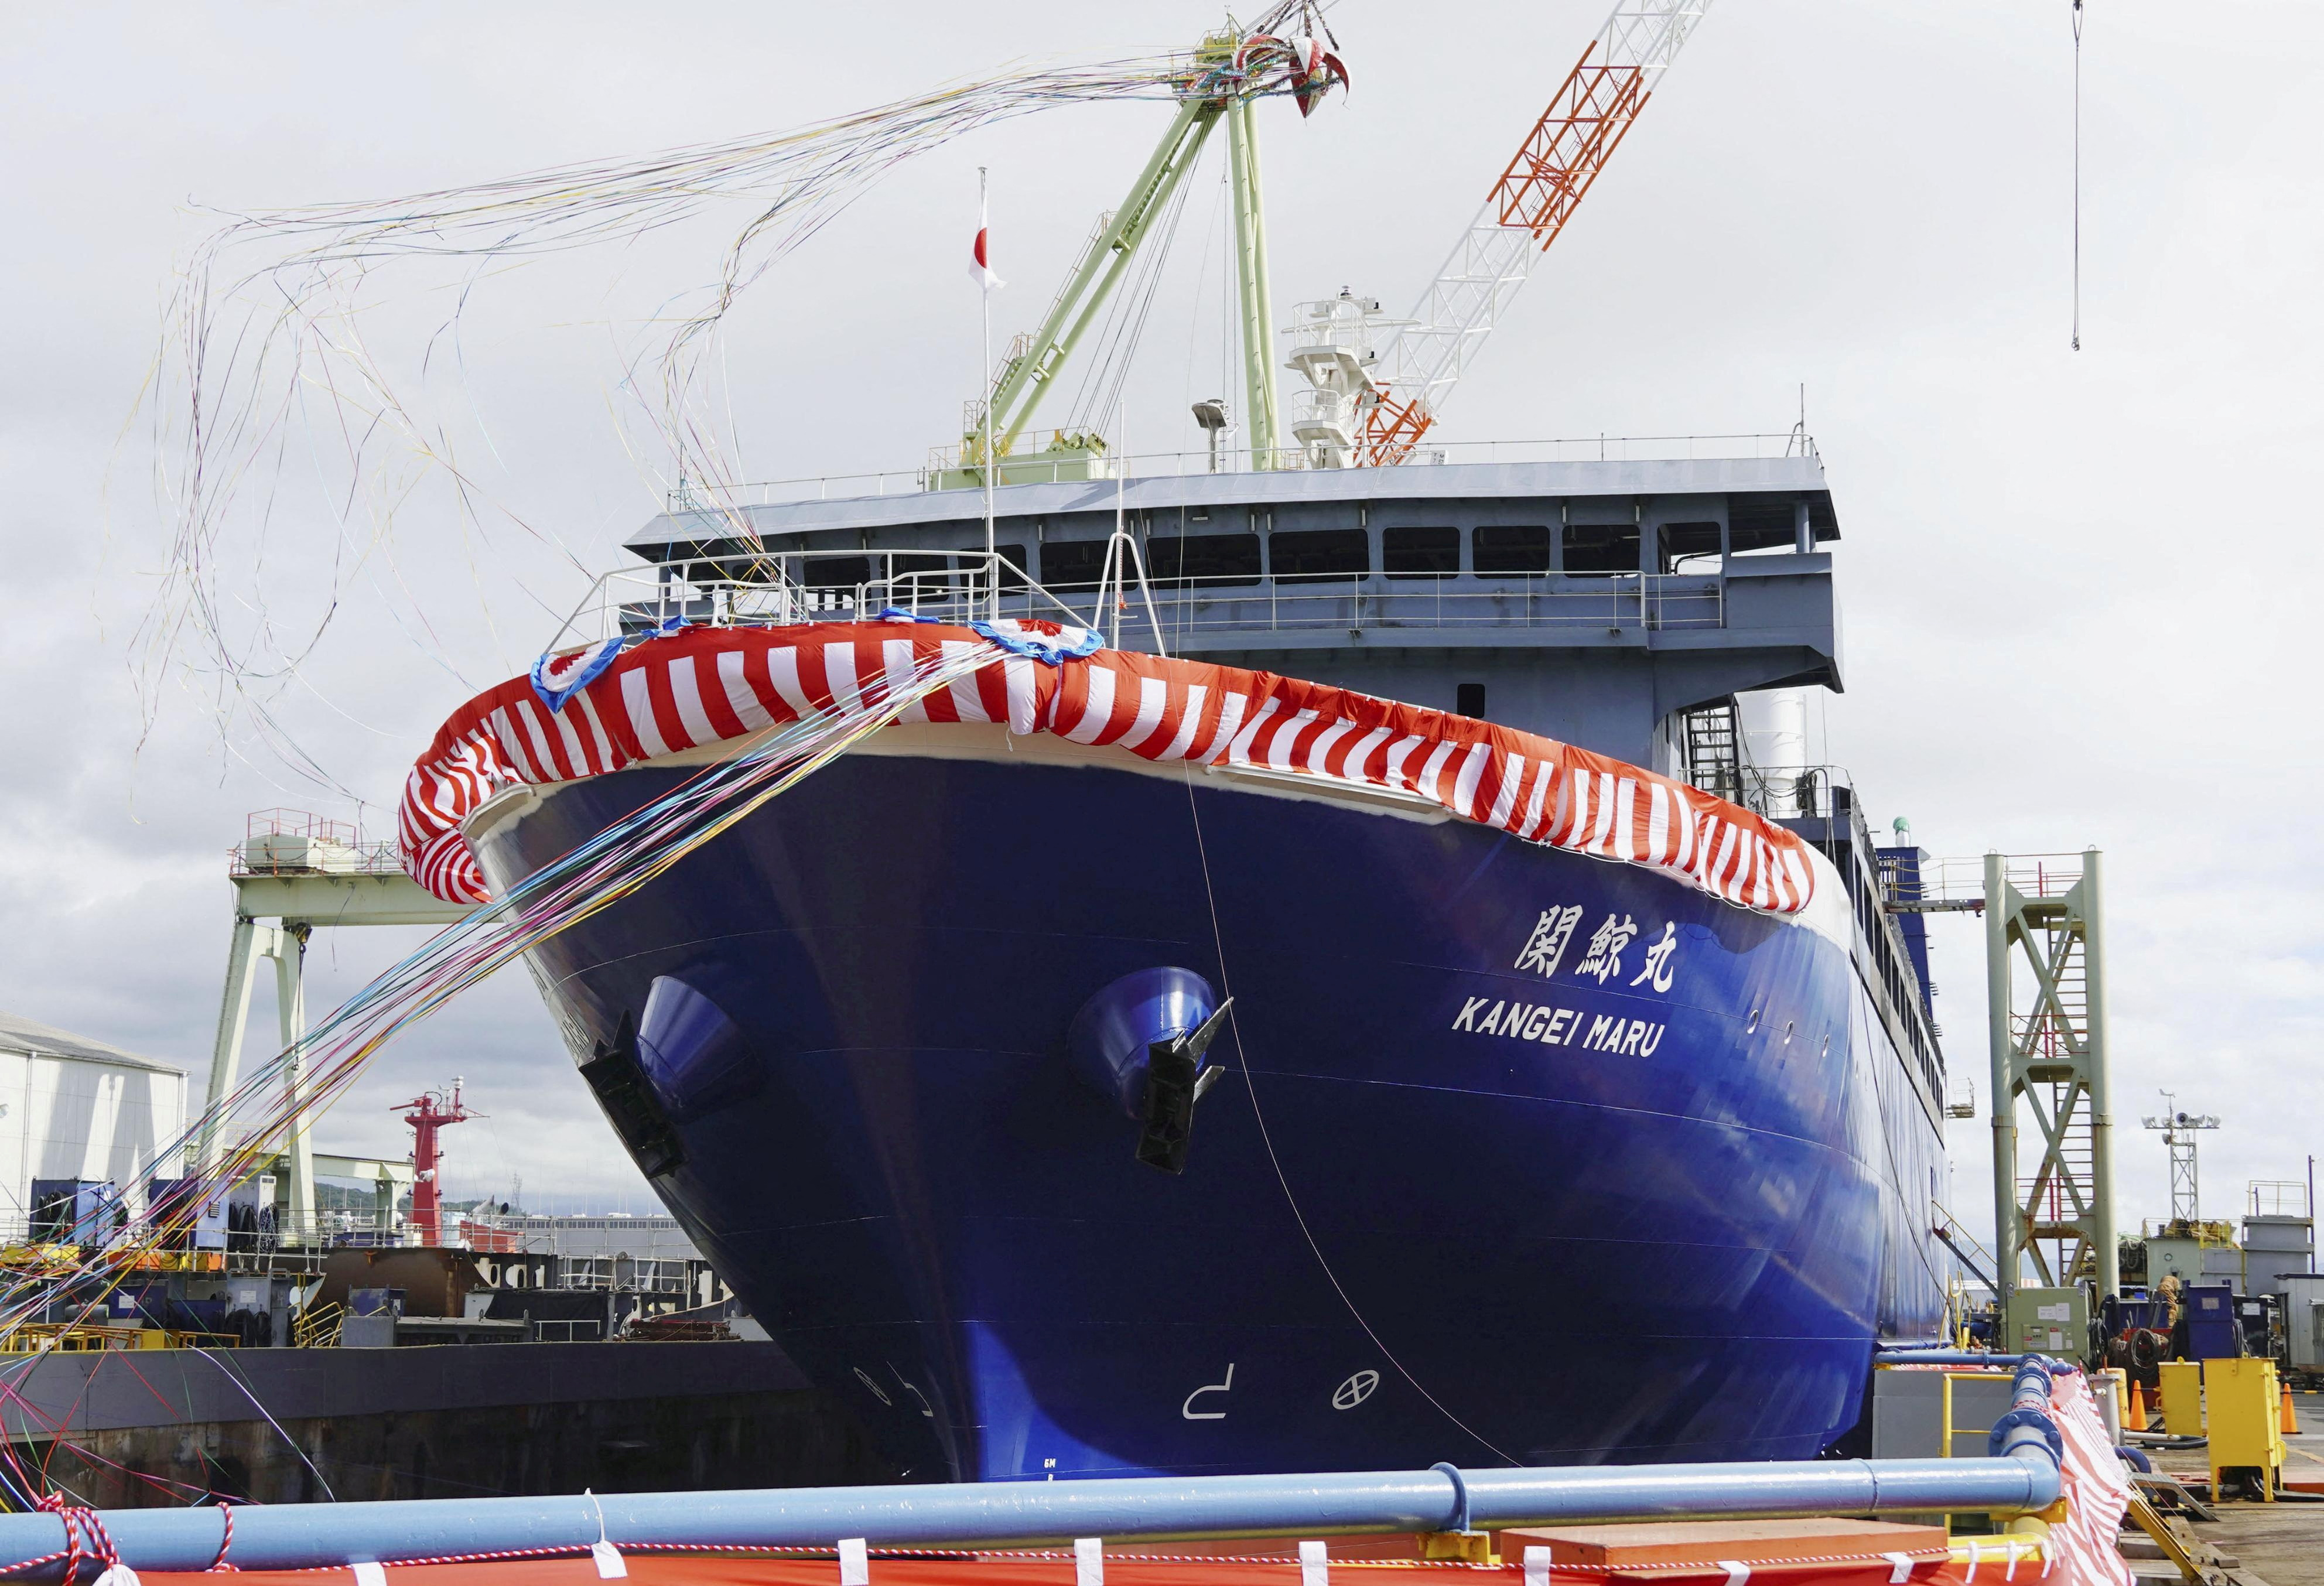 The whaling mother ship Kangei Maru is seen during it's launch ceremony in Shimonoseki